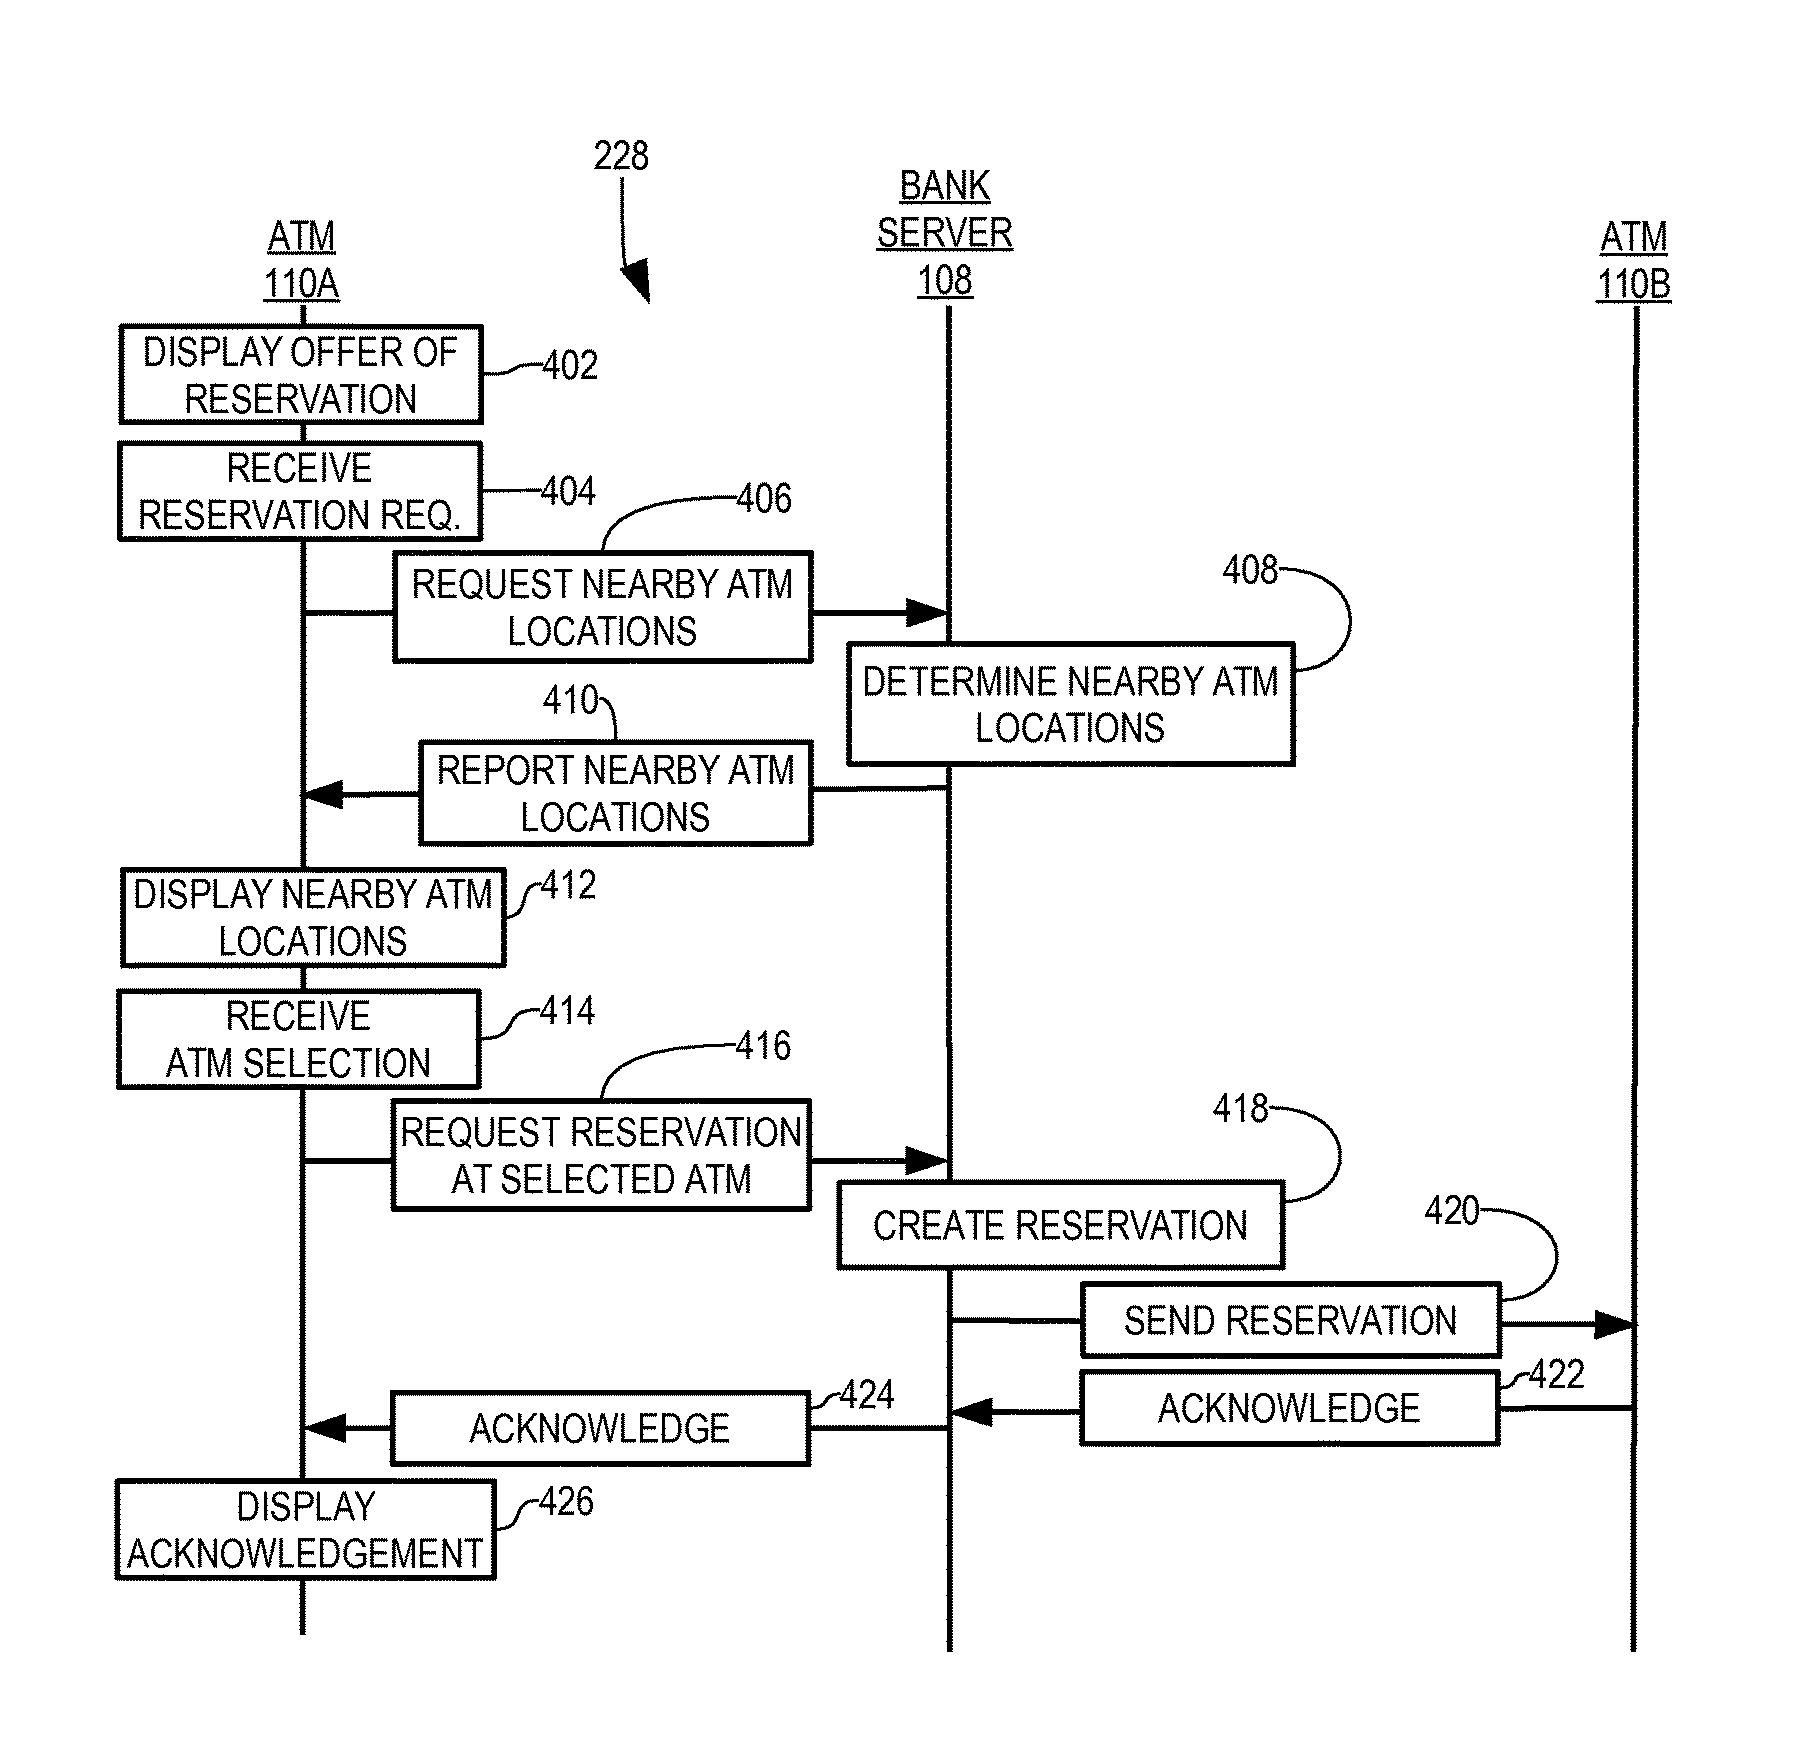 Automatic teller machine inventory and distribution system